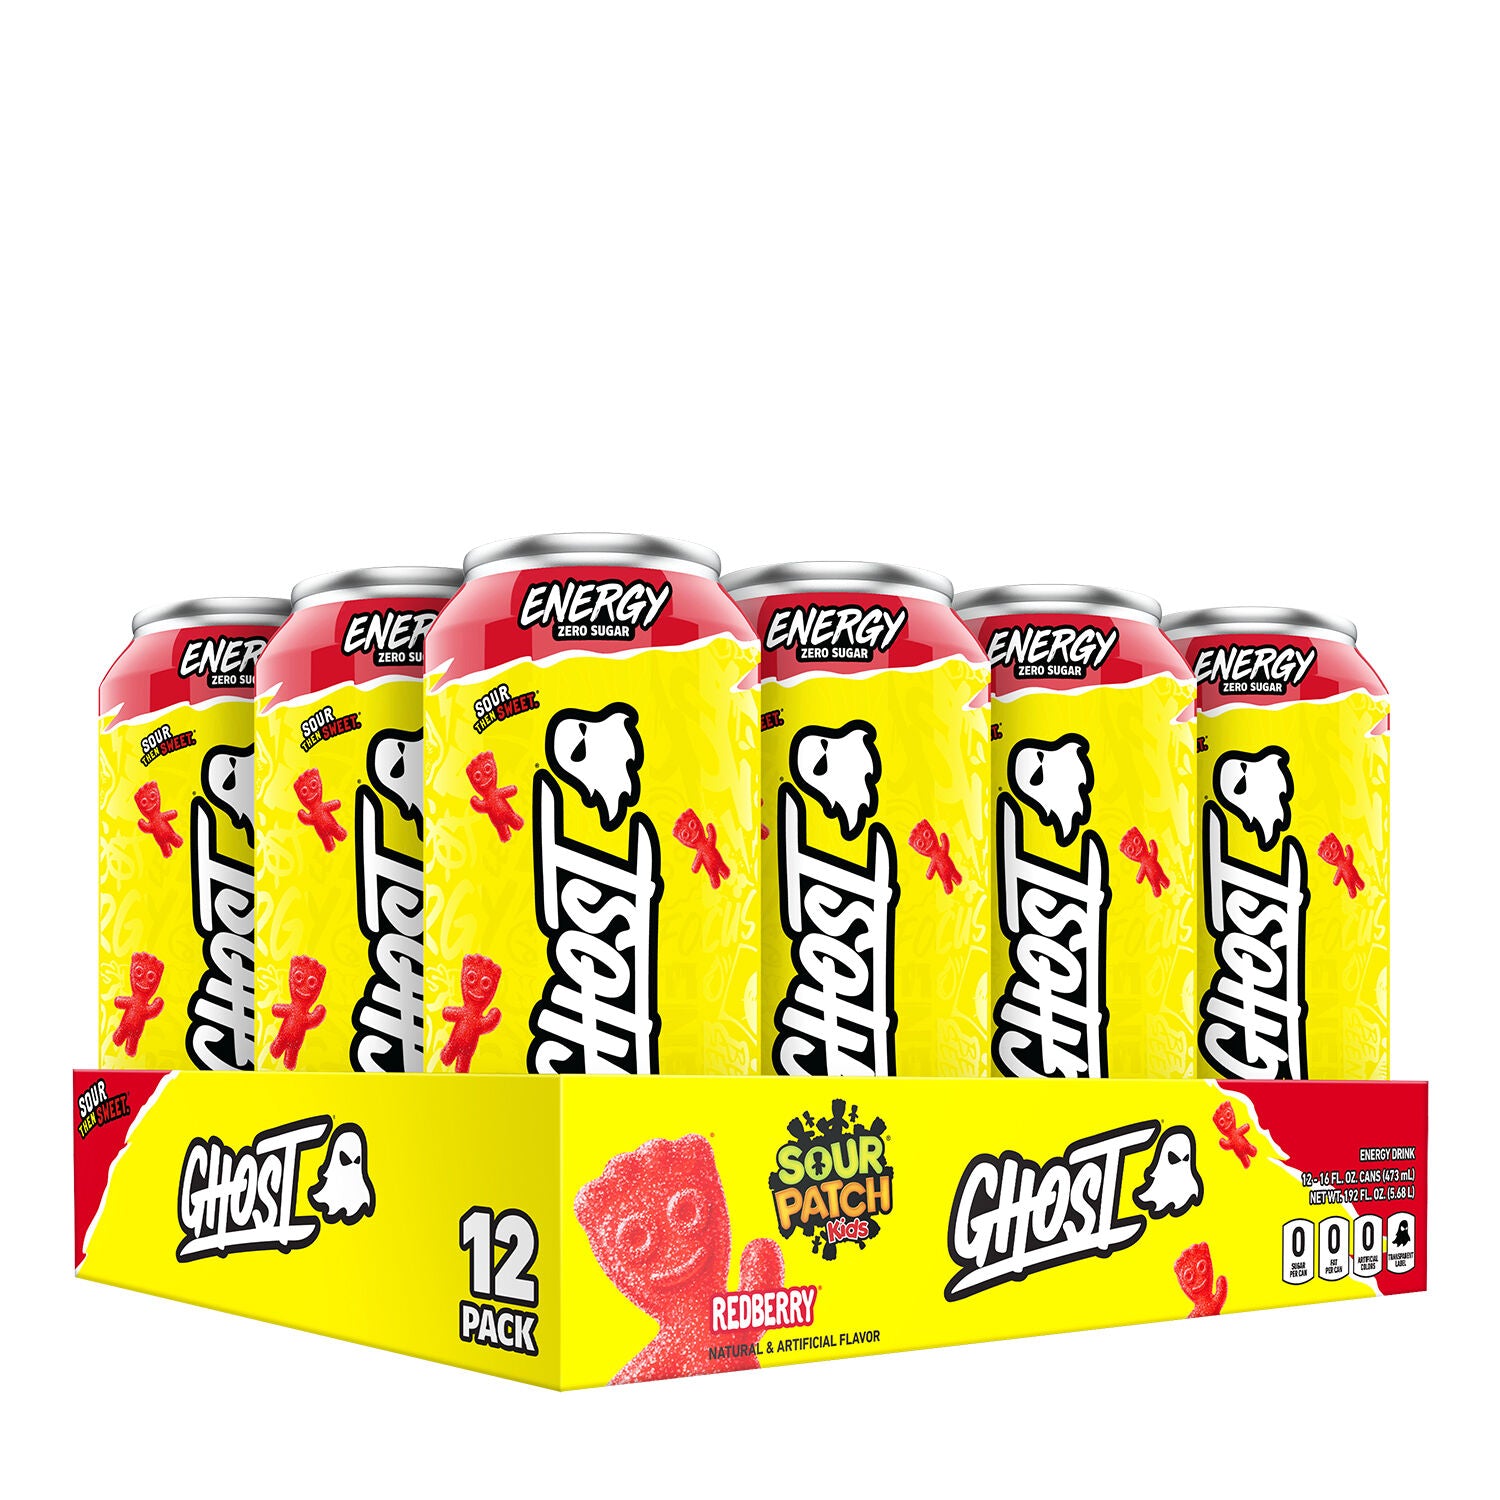 GHOST Energy Drink (1 case of 12 cans) Protein Snacks RedBerry Sour Patch Kids GHOST